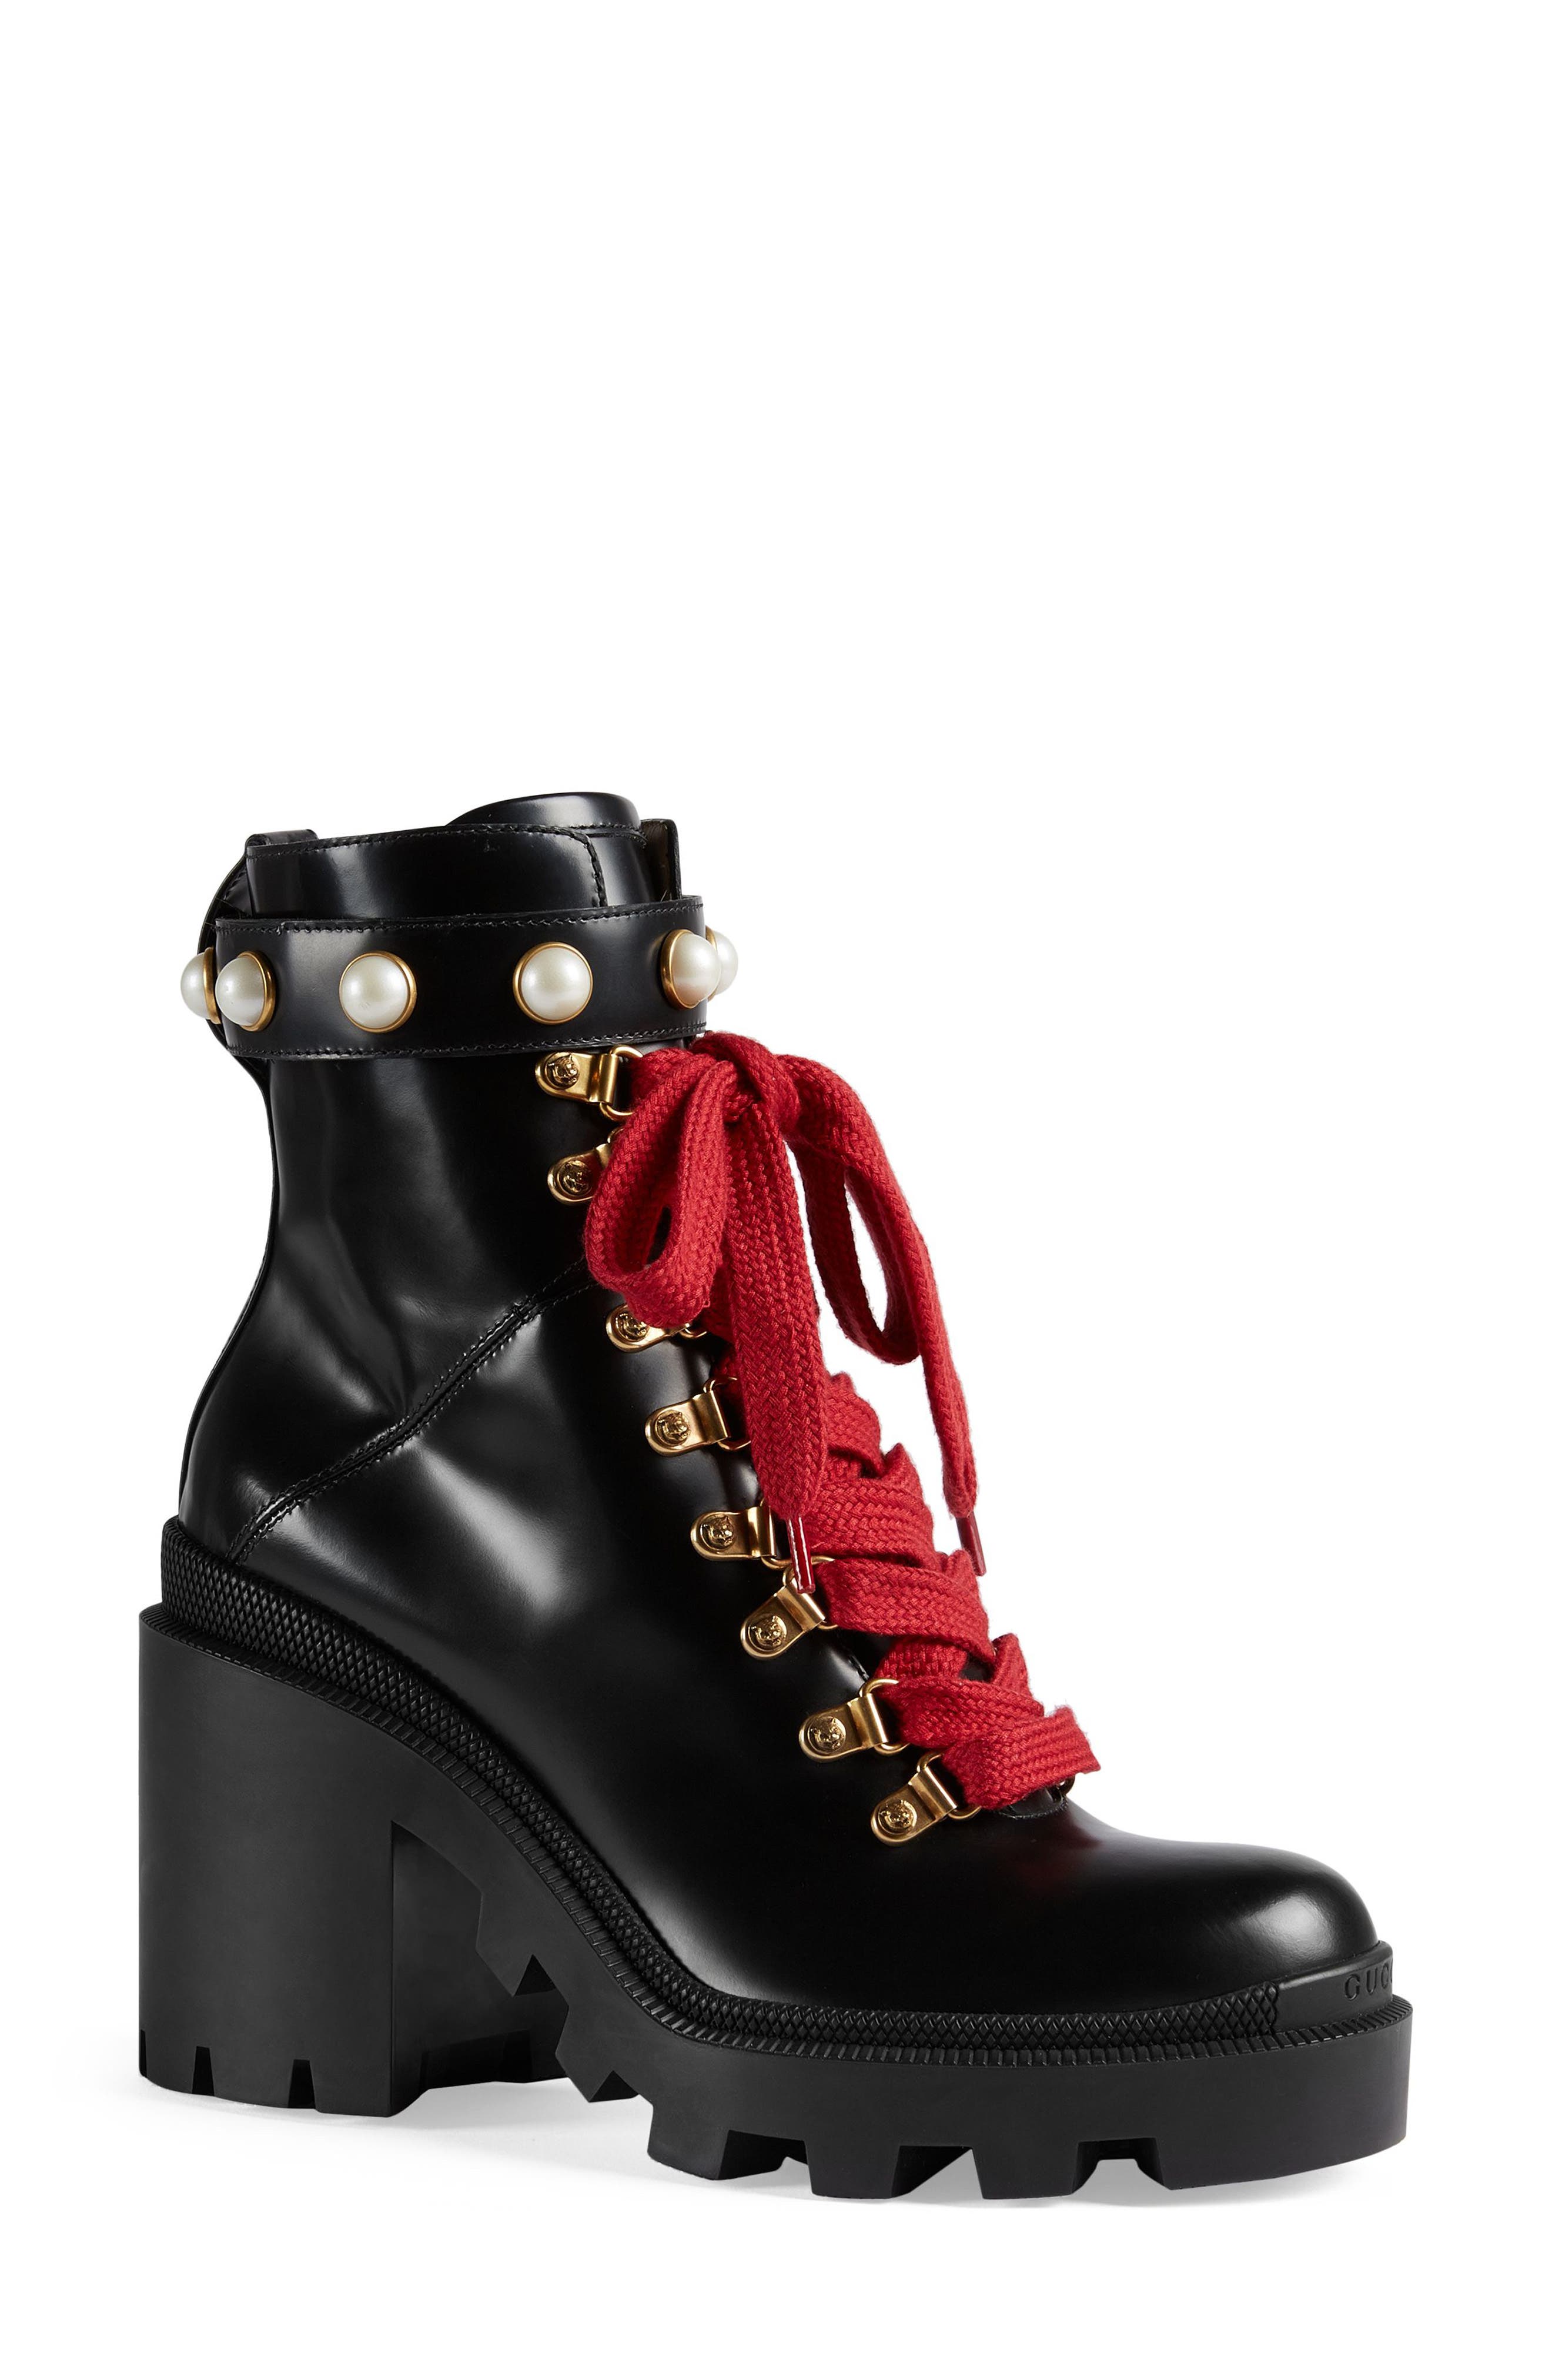 gucci look alike boots